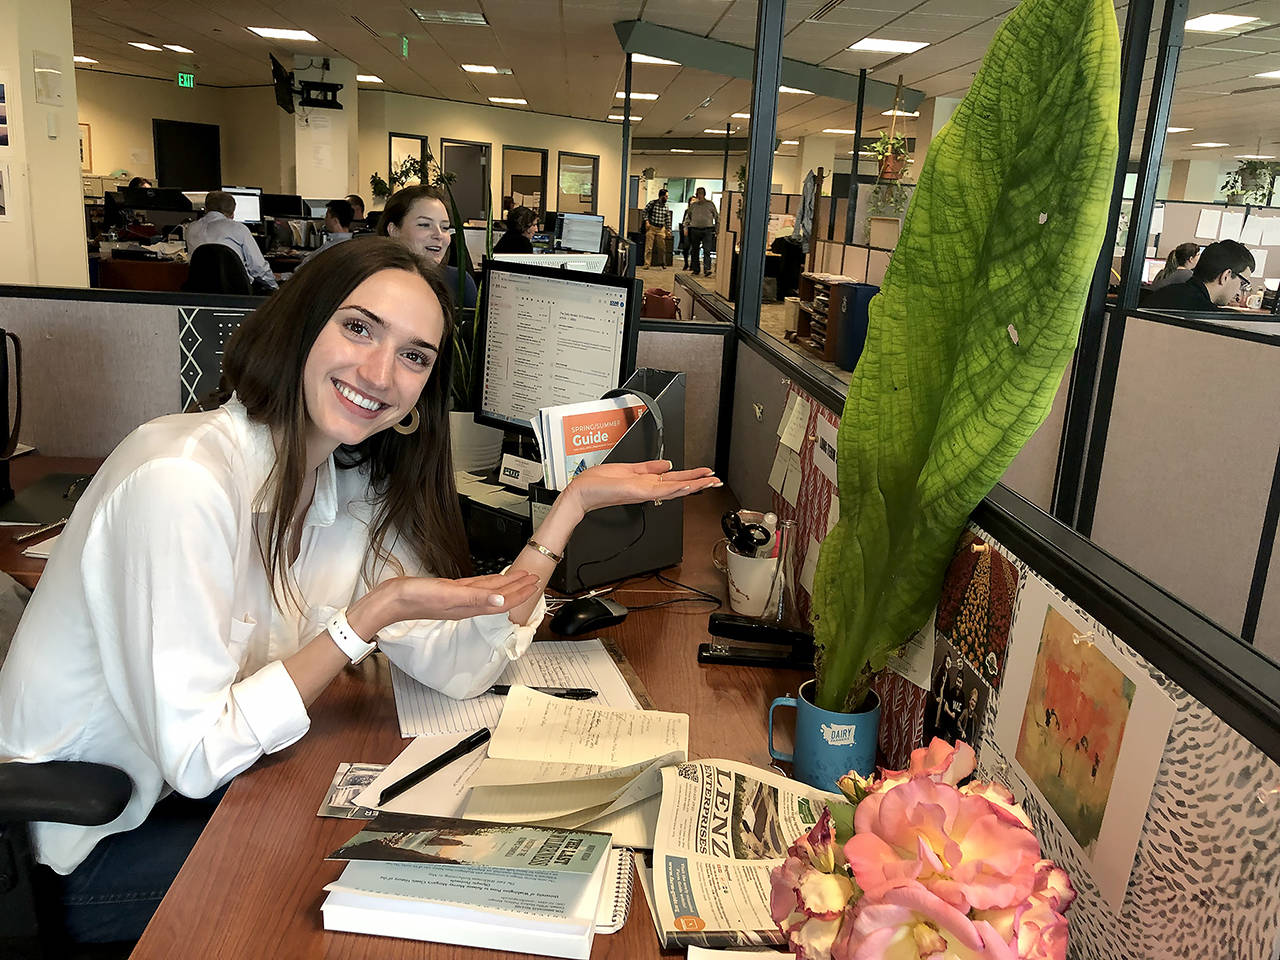 Herald reporter Julia-Grace Sanders appears to appreciate the gift of a giant leaf in 2019. (Andrea Brown / The Herald)